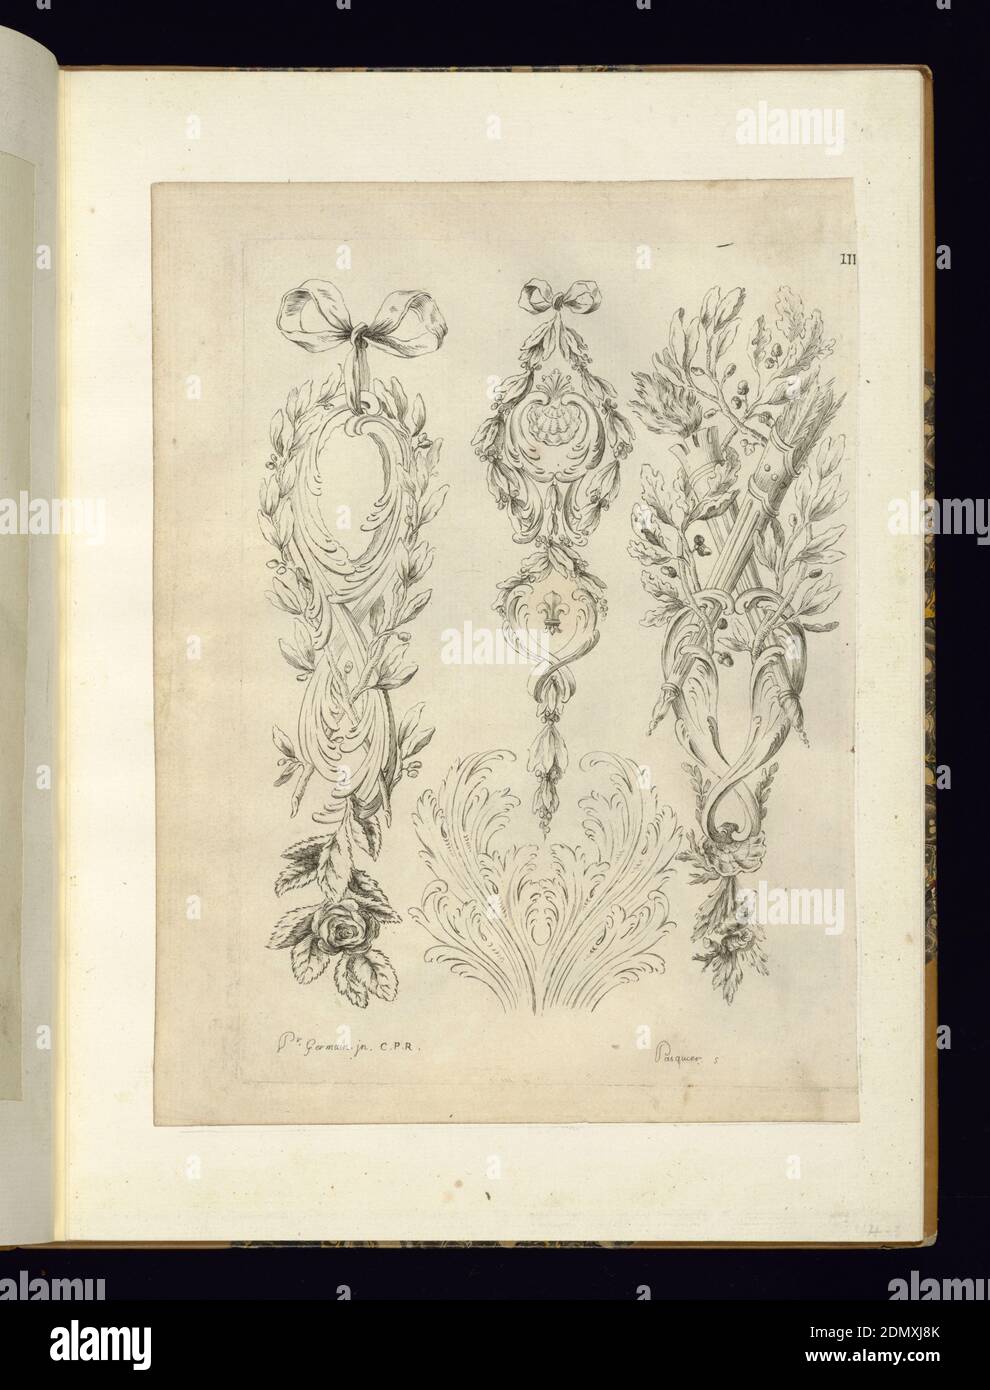 Ornamental Friezes, Pierre Germain, French, 1703 - 1783, Jacques Jean Pasquier, French, died 1785, Engraving on white paper, Rocaille design for three ornamental friezes., France, 1751, ornament, Print Stock Photo